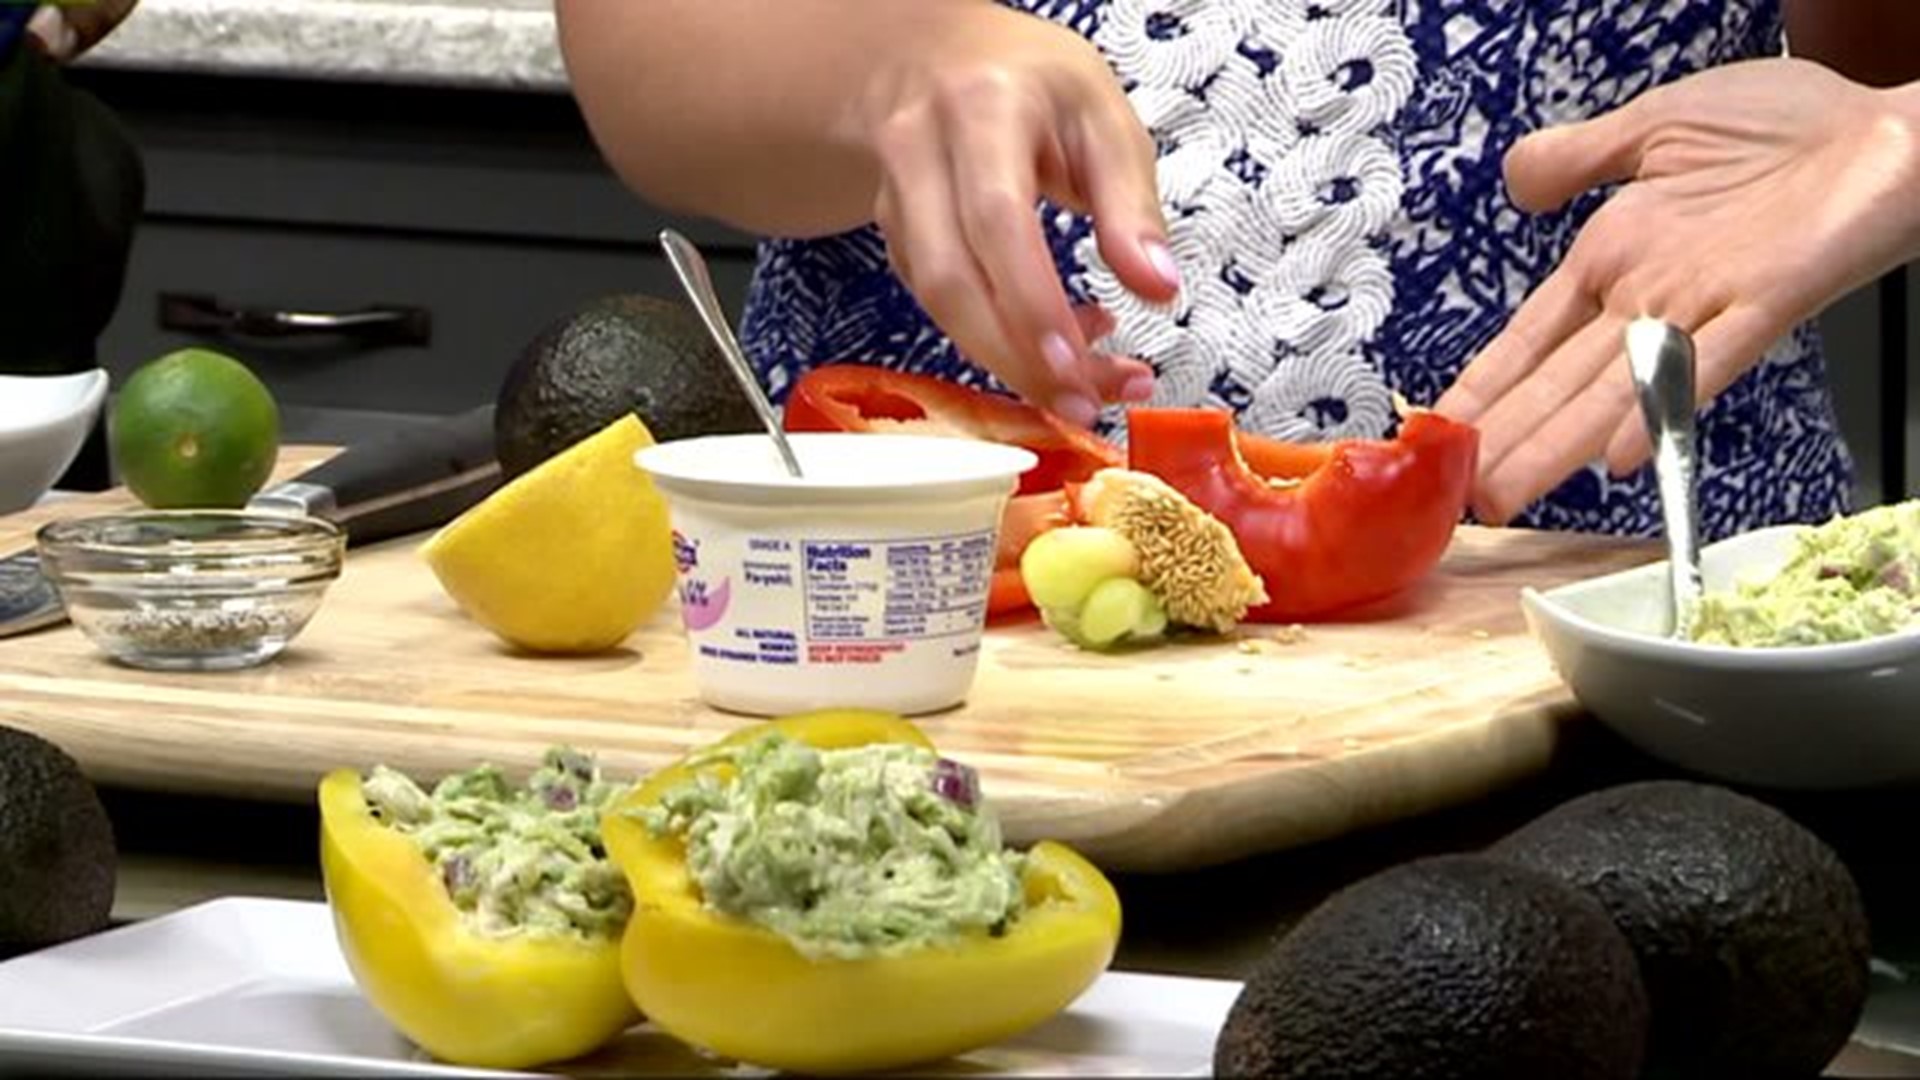 Medifast provides recipe for Avocado Chicken Salad Stuffed Mini Peppers for Men`s Health Month